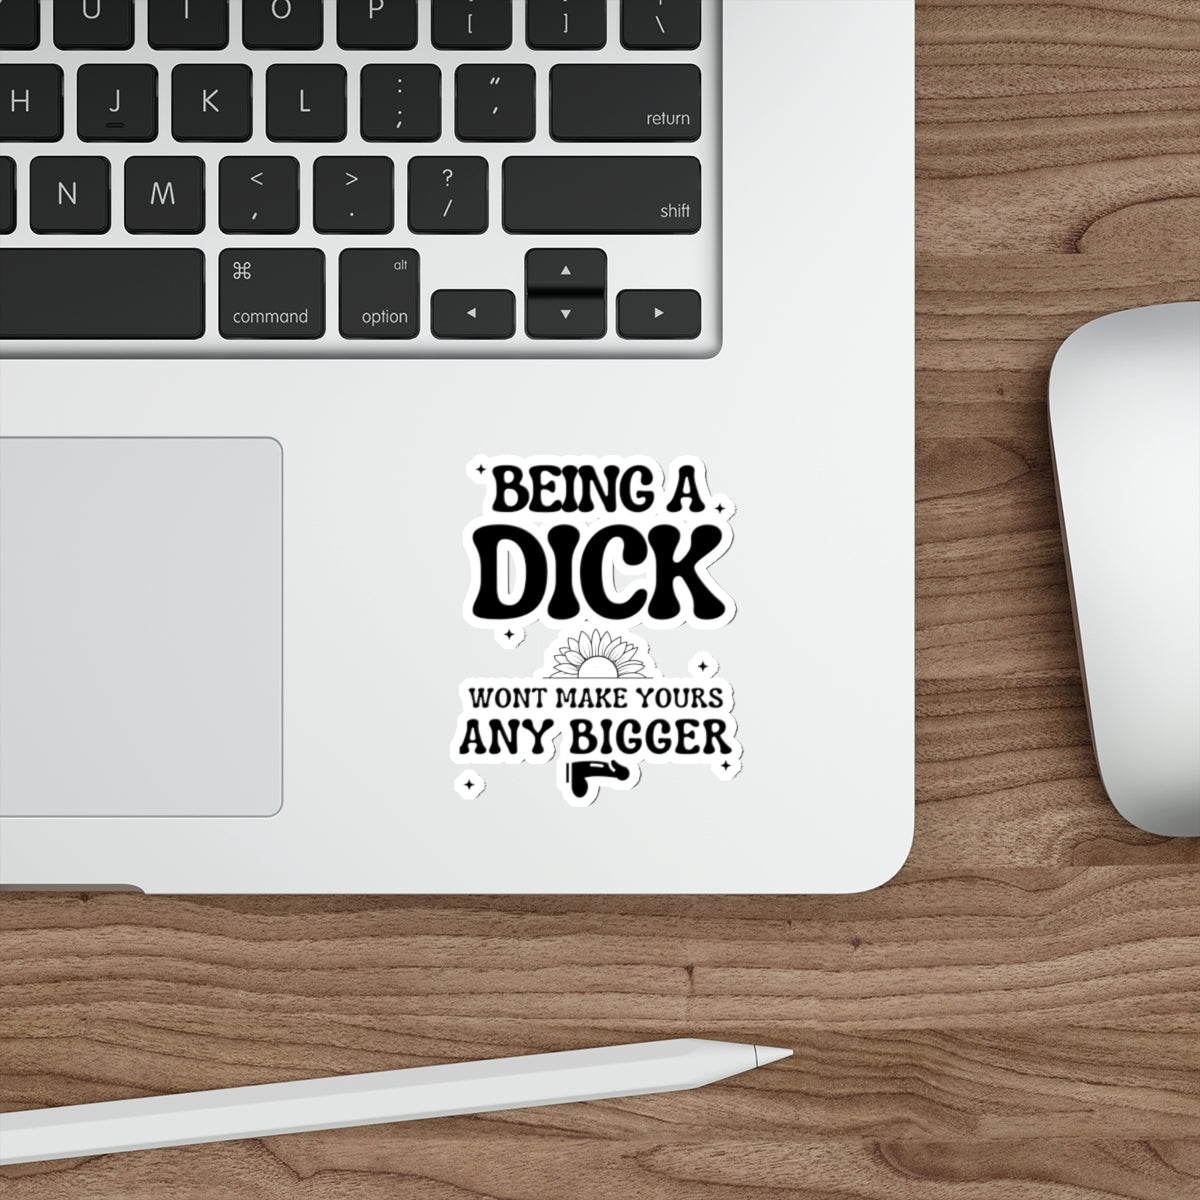 Being a dick stickers